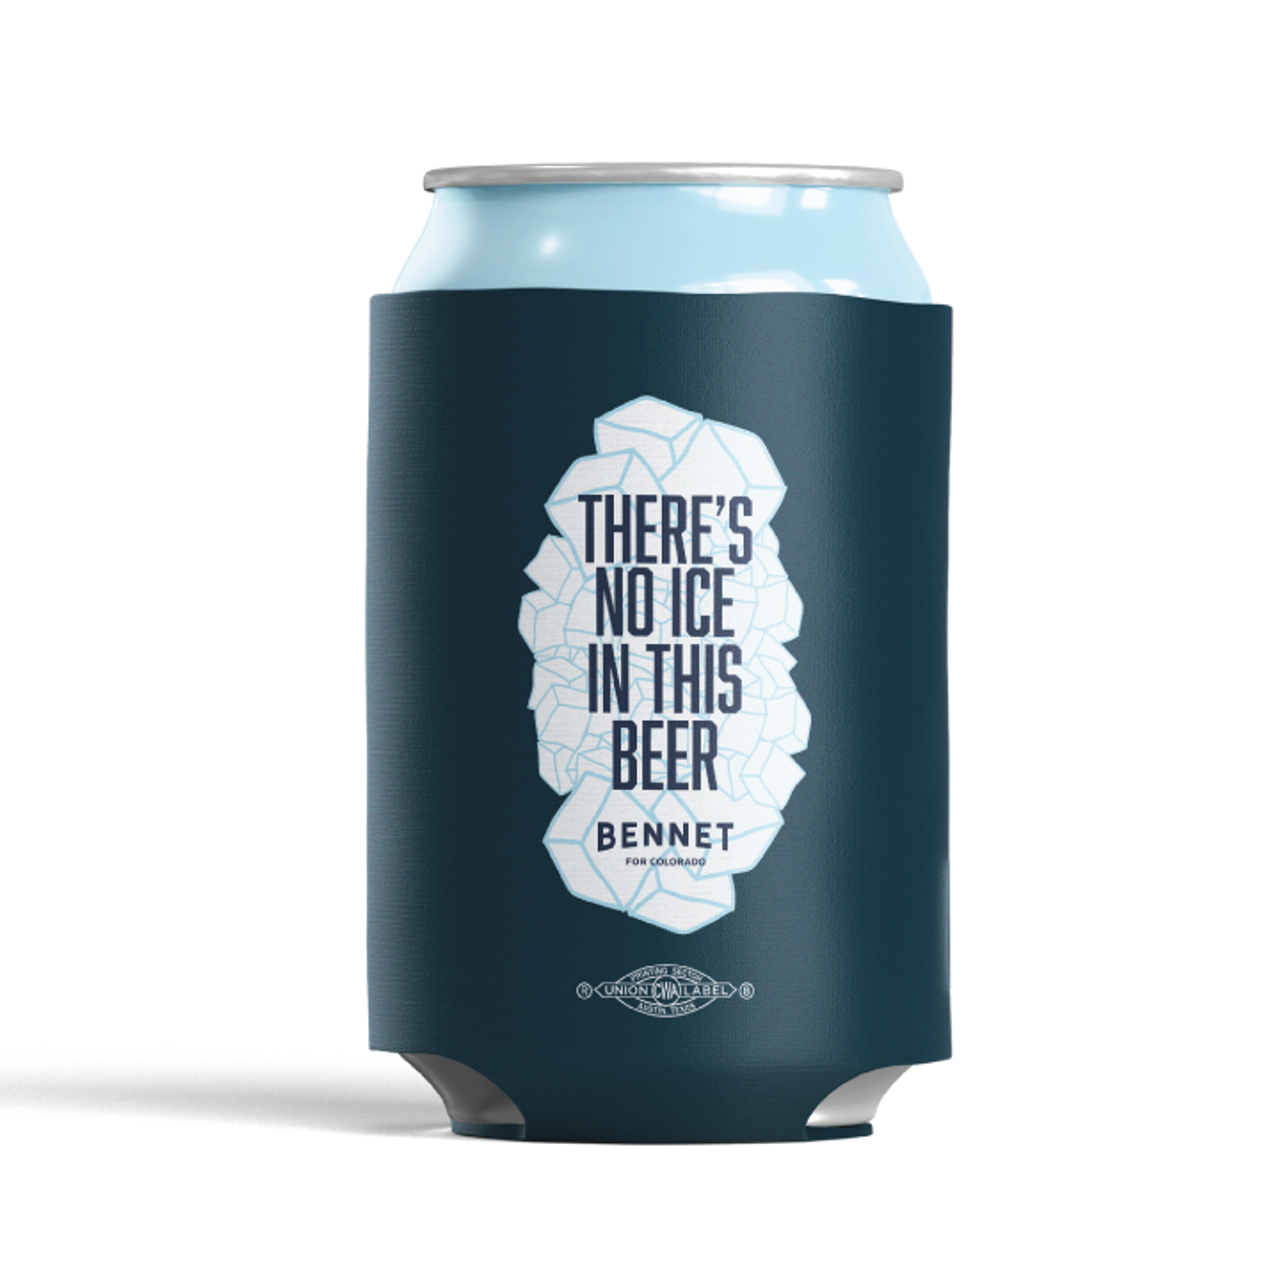 https://cdn11.bigcommerce.com/s-1wfx0jnw1g/images/stencil/1280x1280/products/273/638/noIceInThisBeer_webGraphics_proof__61568.1666041684.png?c=1